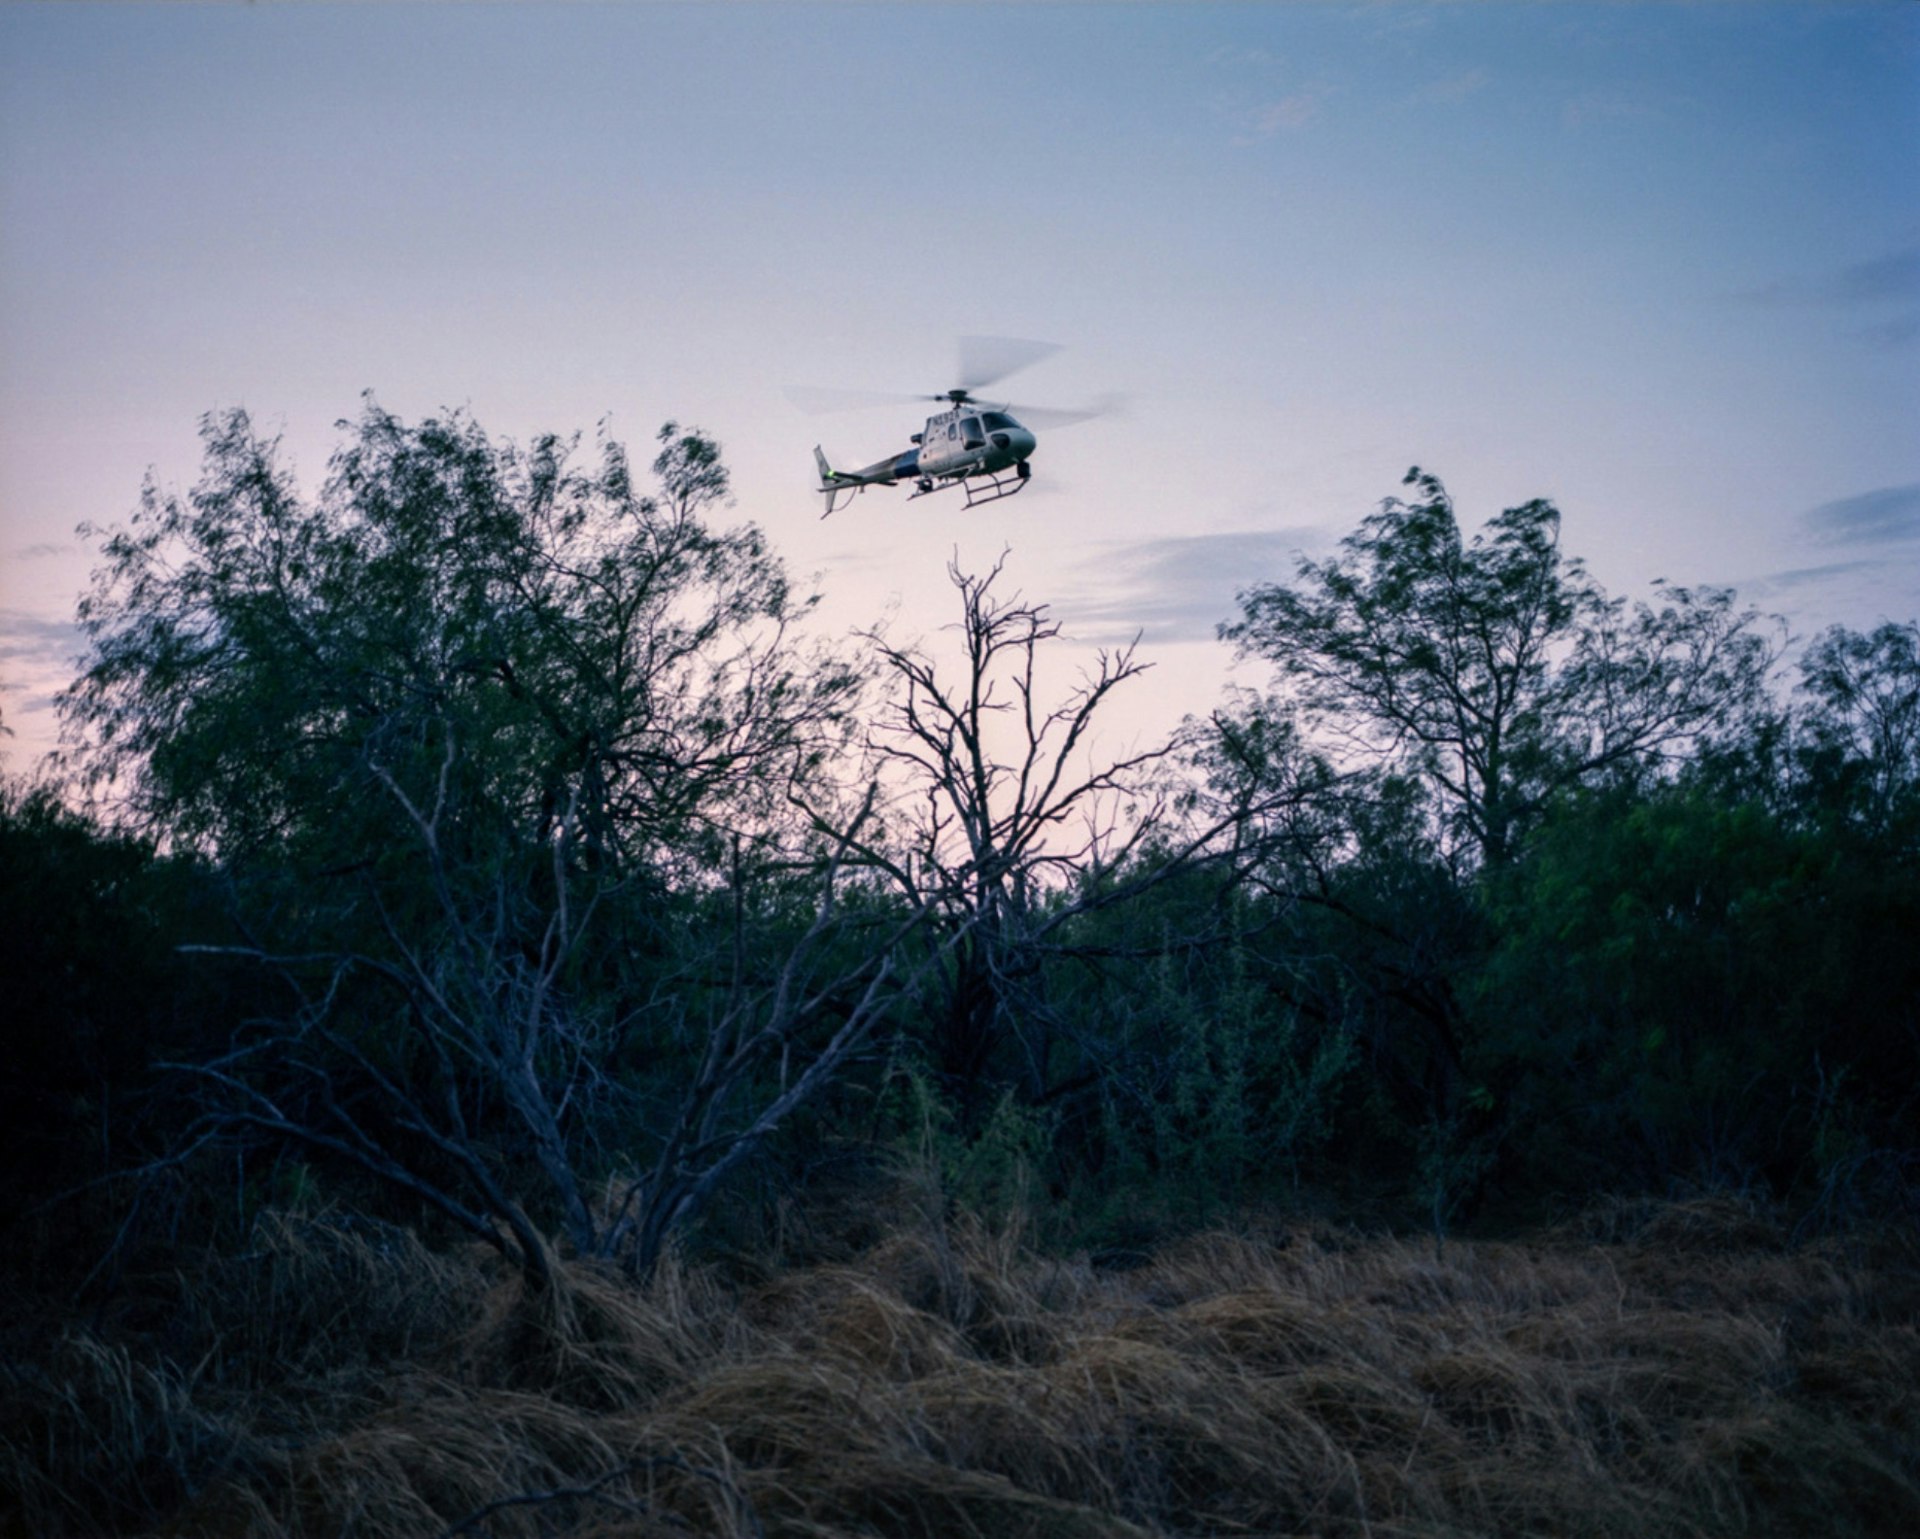 A US Border Patrol helicopter searches the brush for two men who were spotted by agents. They were never found.